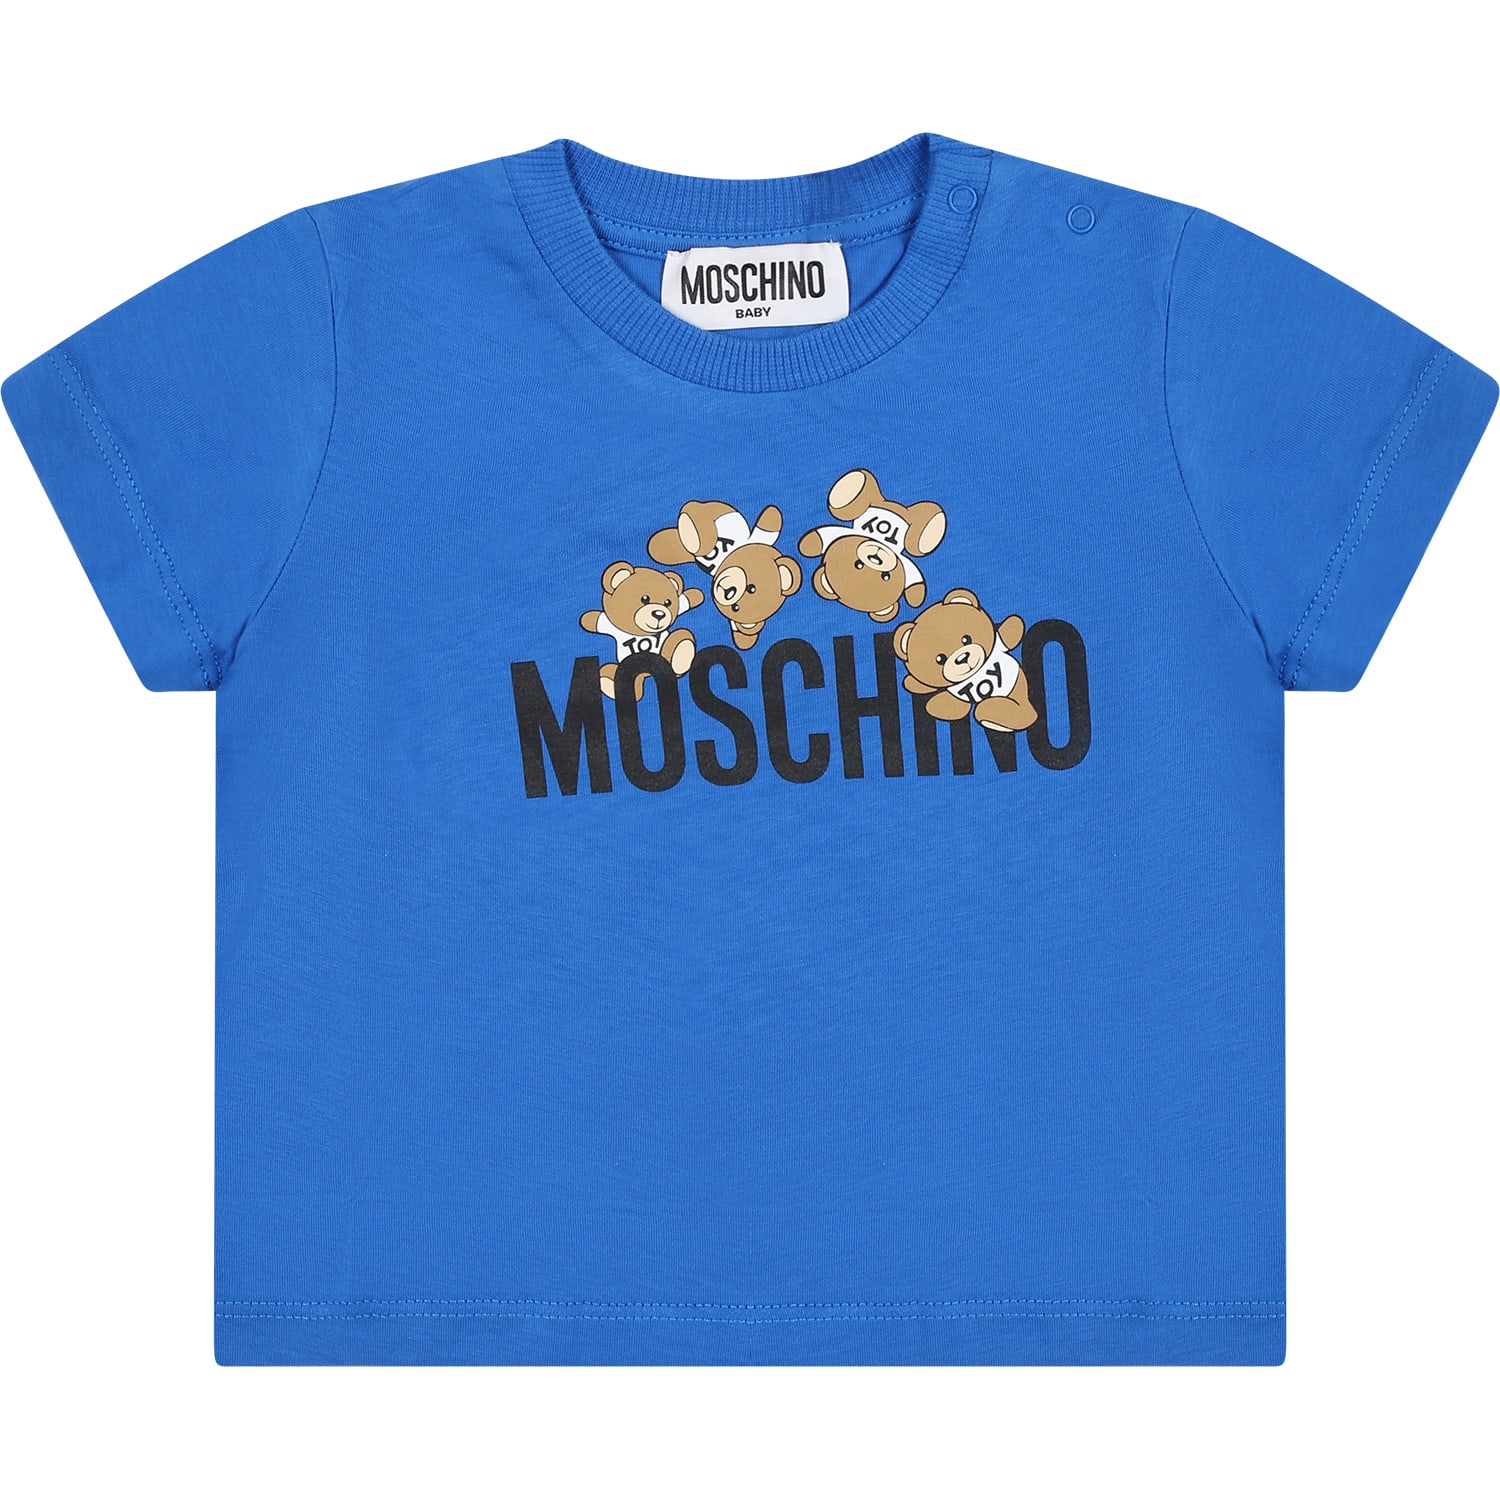 Moschino Kids' Blue T-shirt For Baby Boy With Teddy Bears And Logo